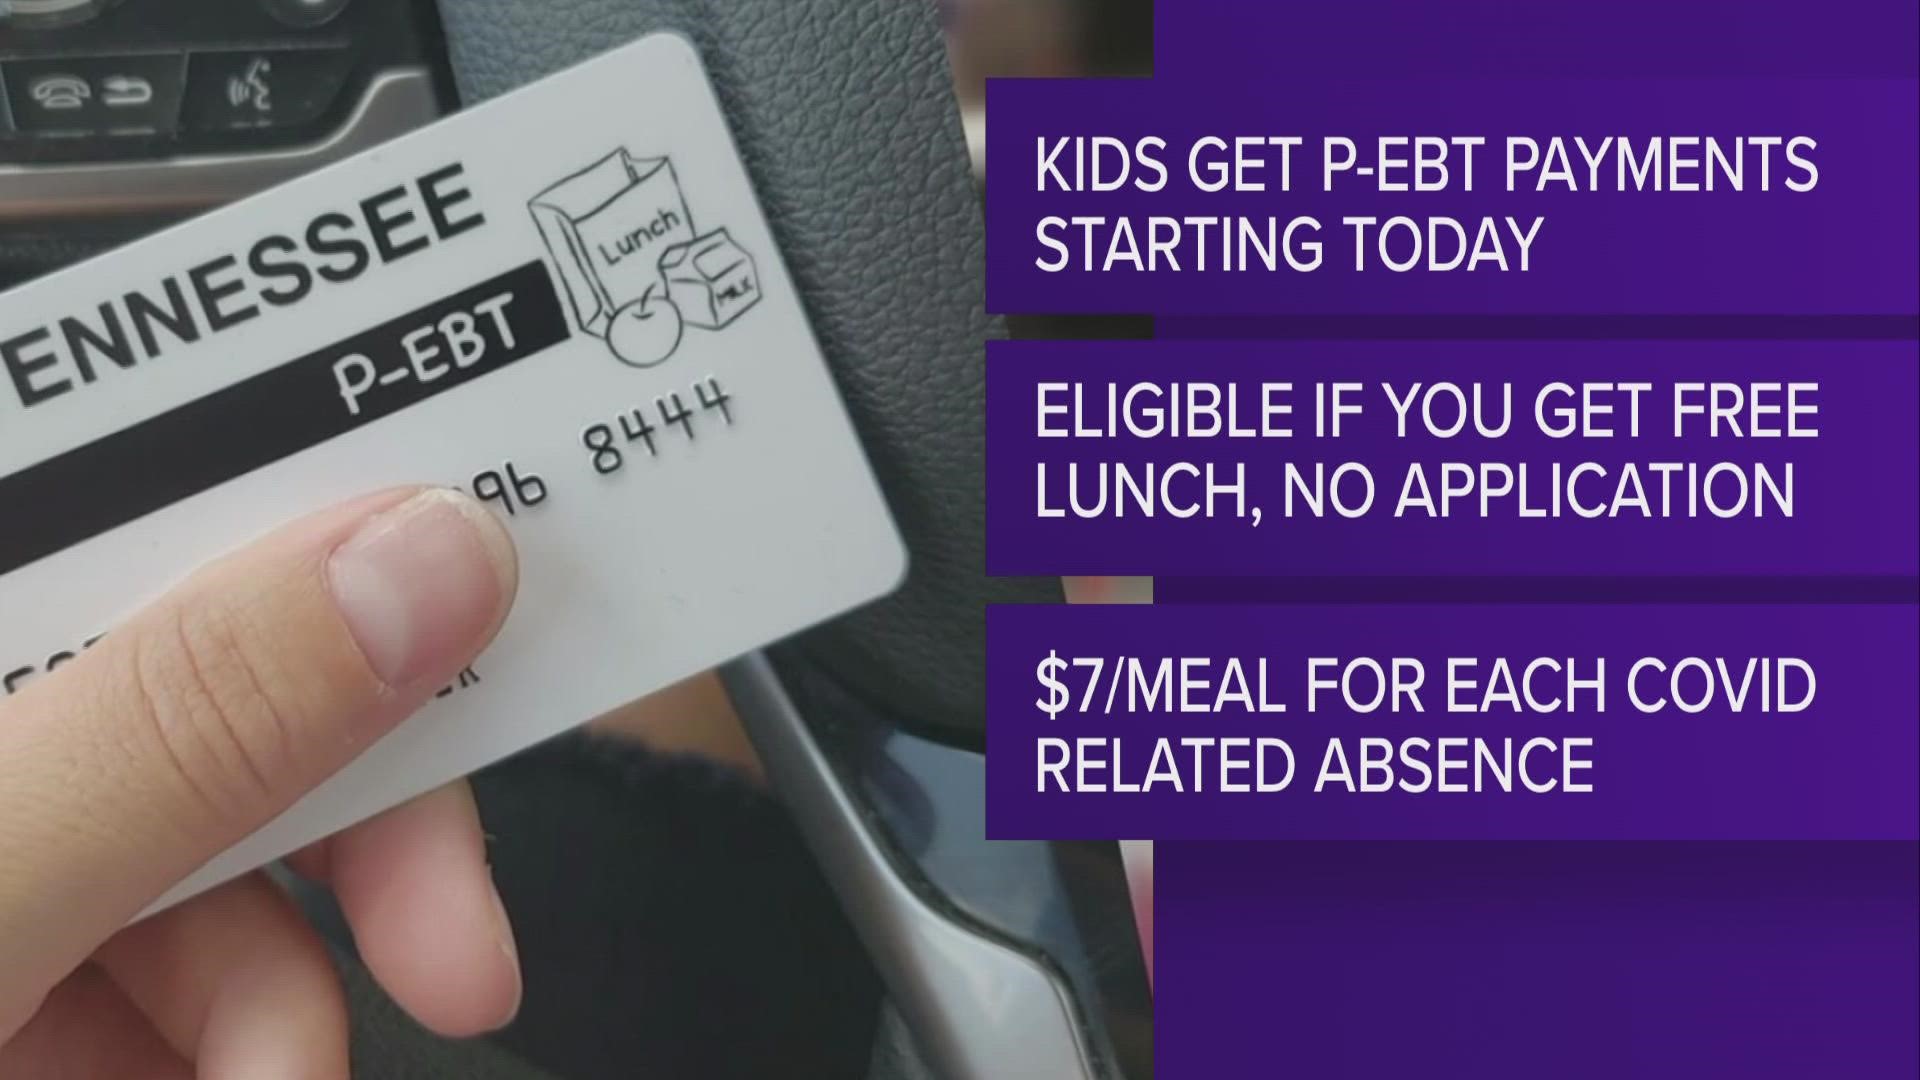 This round of benefits is only for students who get free lunch and were out sick because of COVID-19 or because their school closed for at least five straight days.